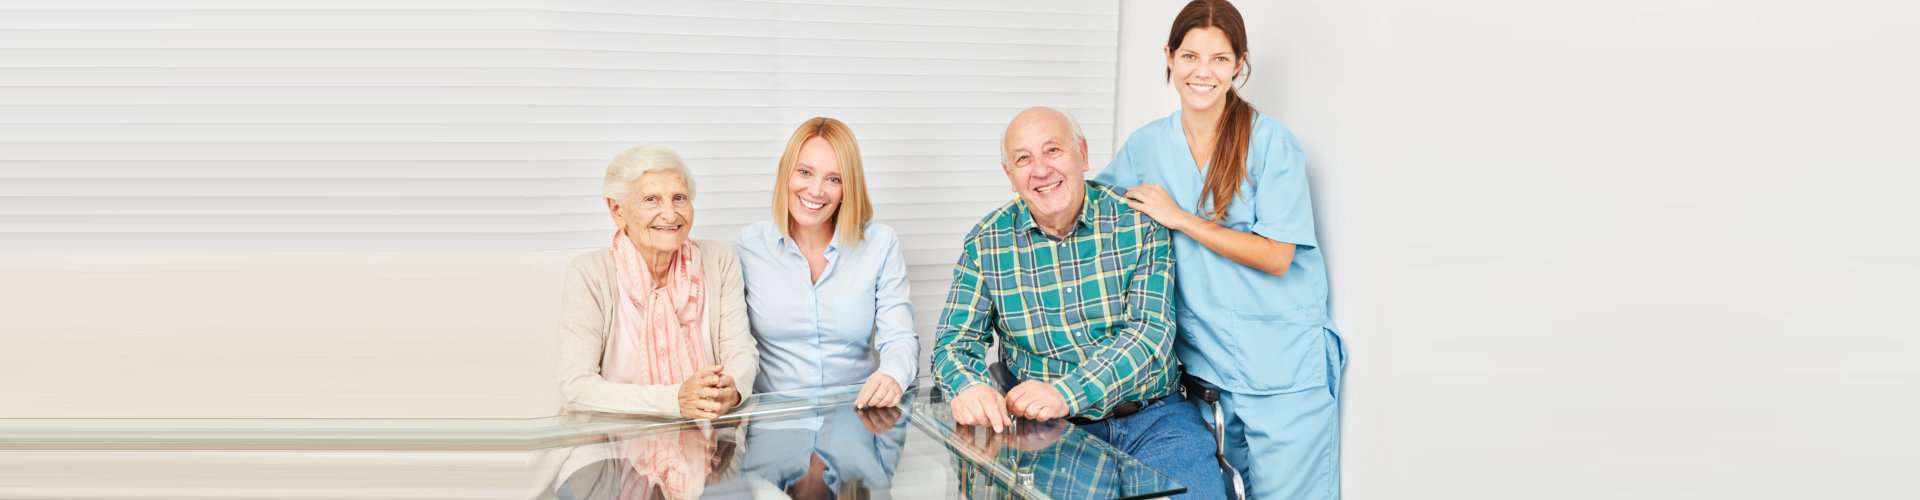 senior couple with the caregiver and adult woman smiling